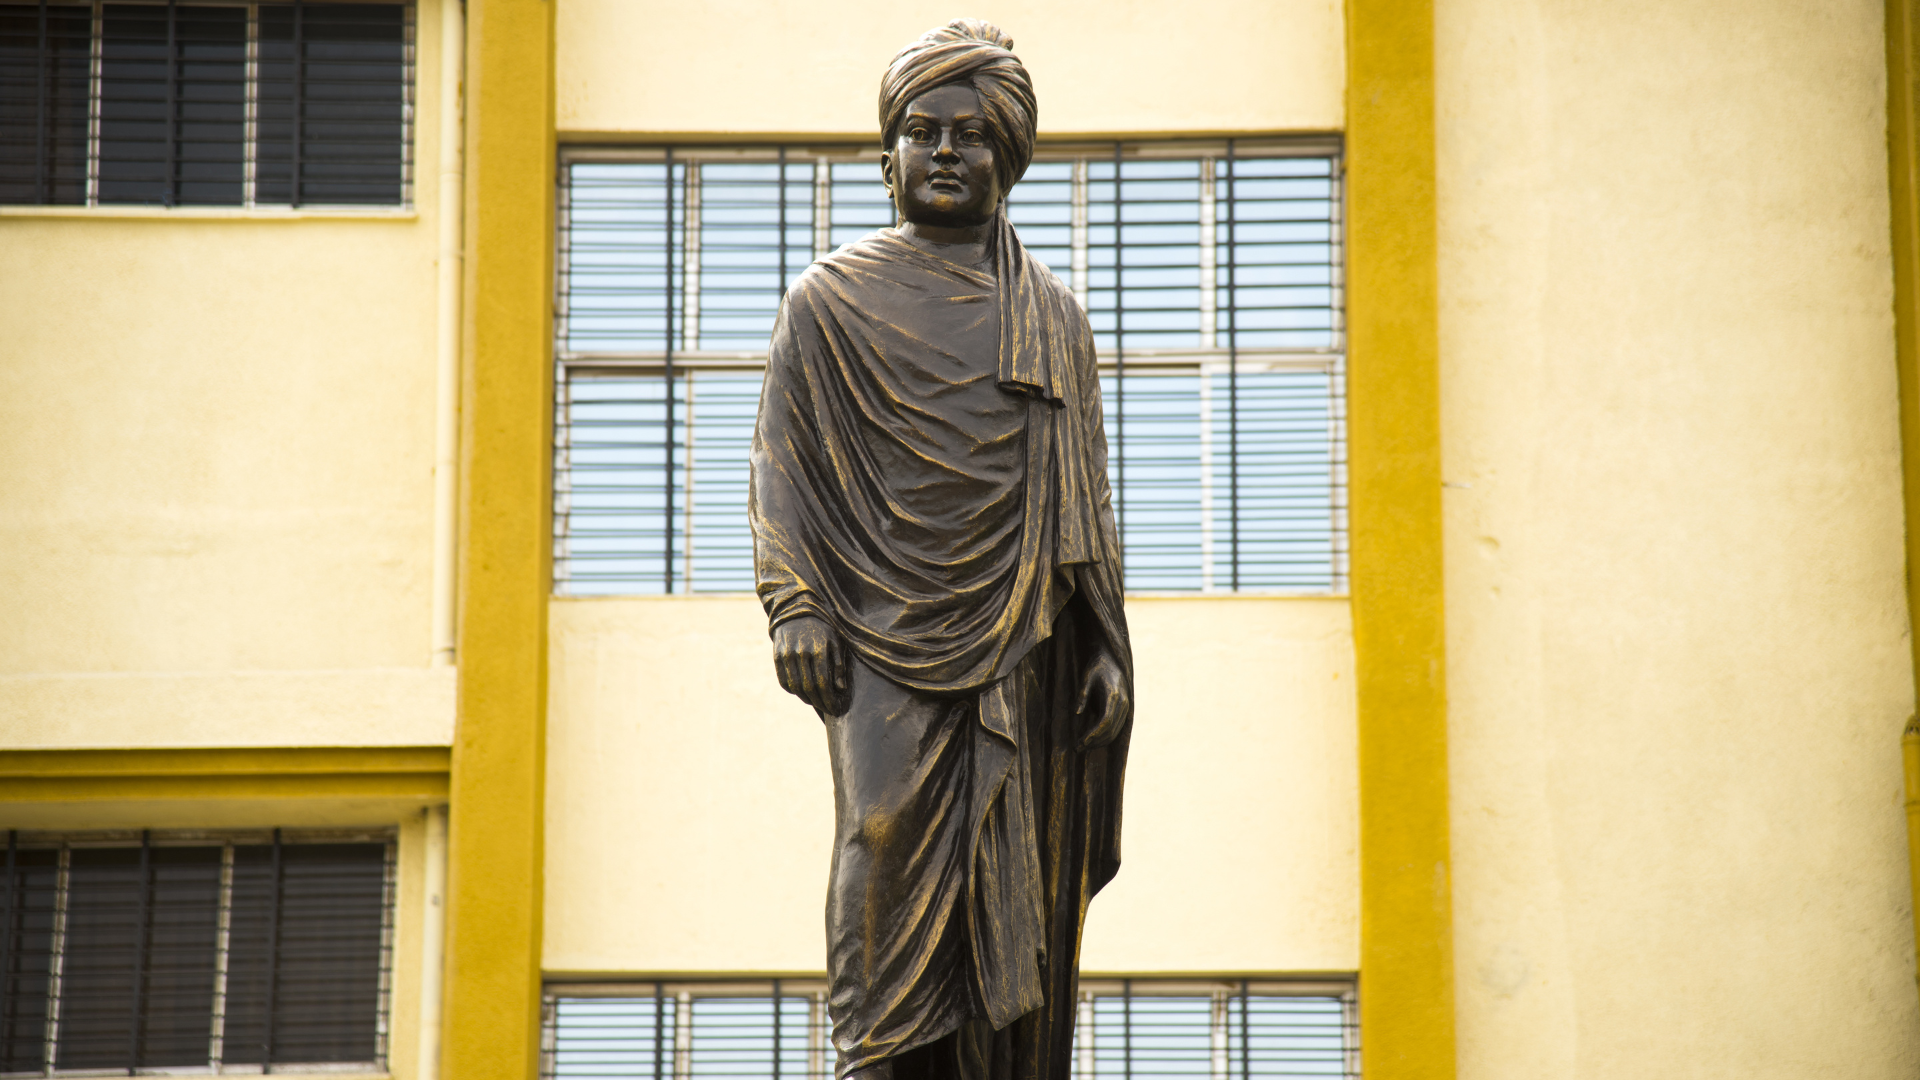 Swami Vivekananda was a great believer in the power of the youth. January 12 is celebrated as National Youth Day